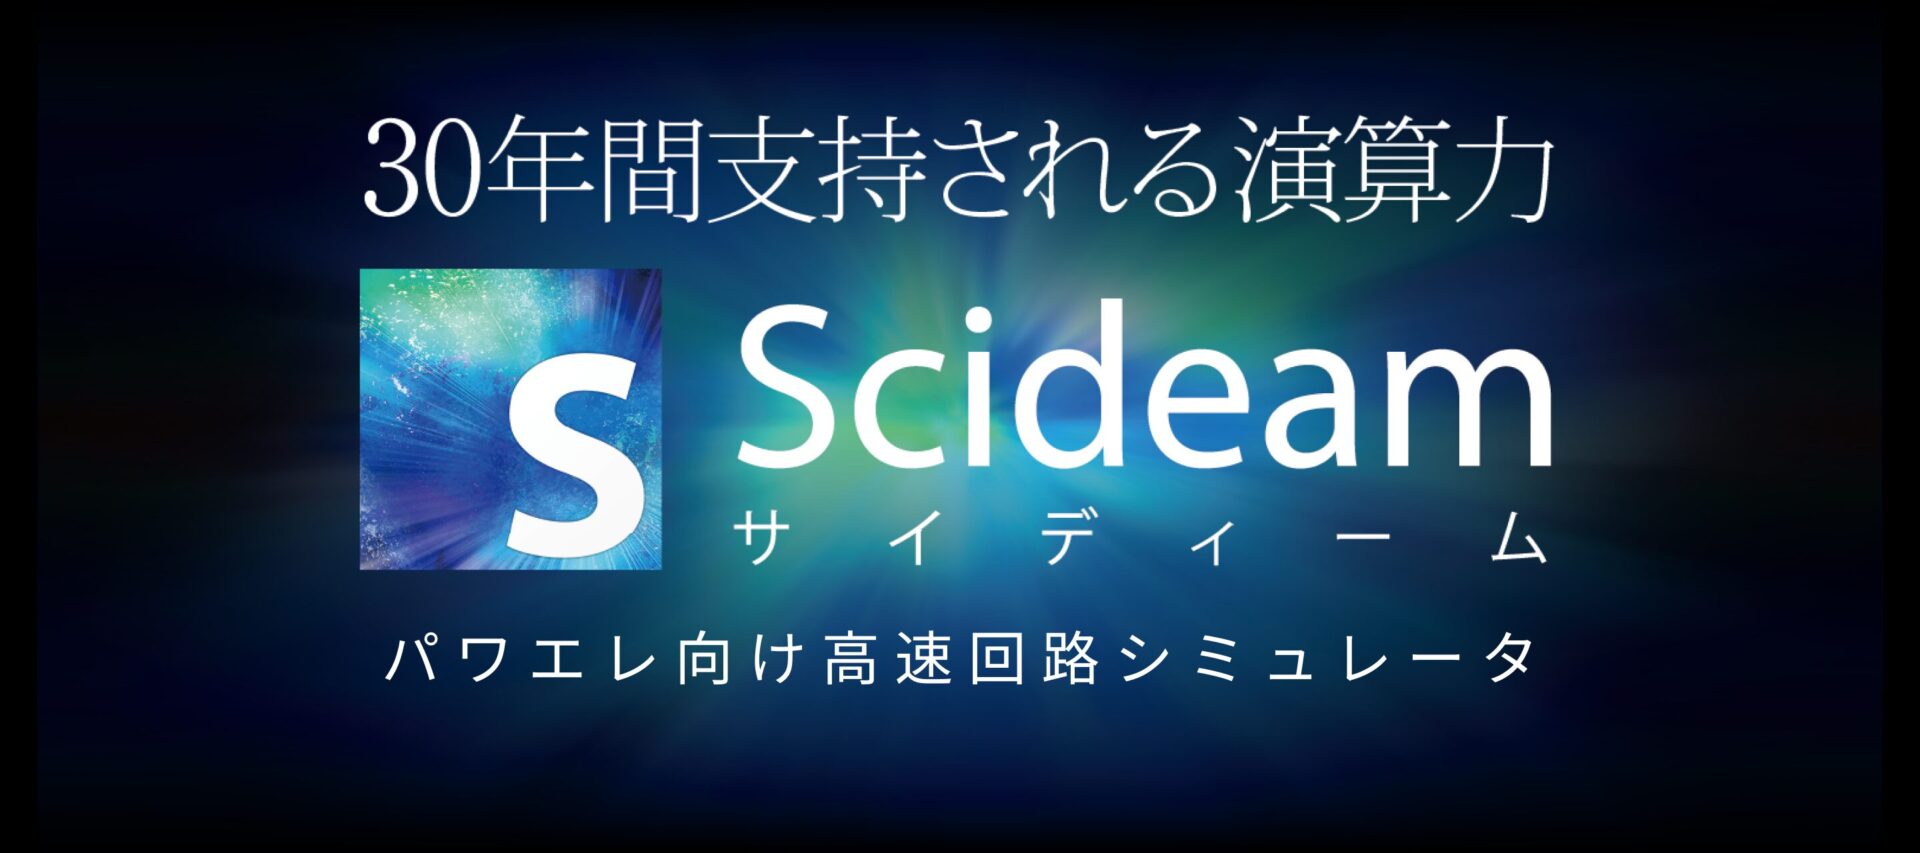 About Scideam